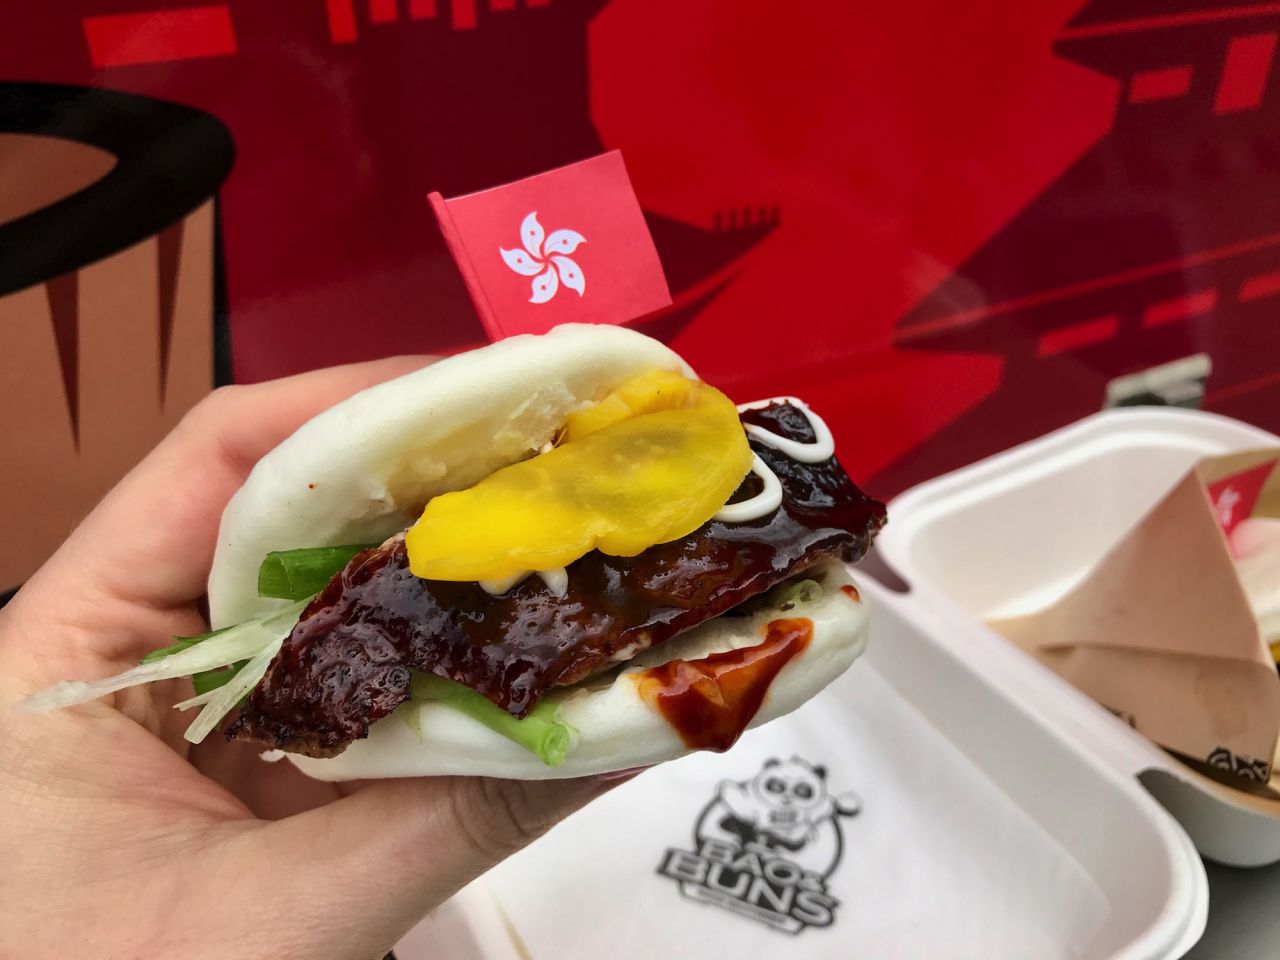 <strong>Bringing food truck culture to Asia: </strong>The fluffy buns are stuffed with barbecued duck, chicken, beef or pork. "I learned about food truck culture in Los Angeles, and I wanted to promote that in Asian countries, starting in Hong Kong," says Bao & Buns operator Raymond Wong.